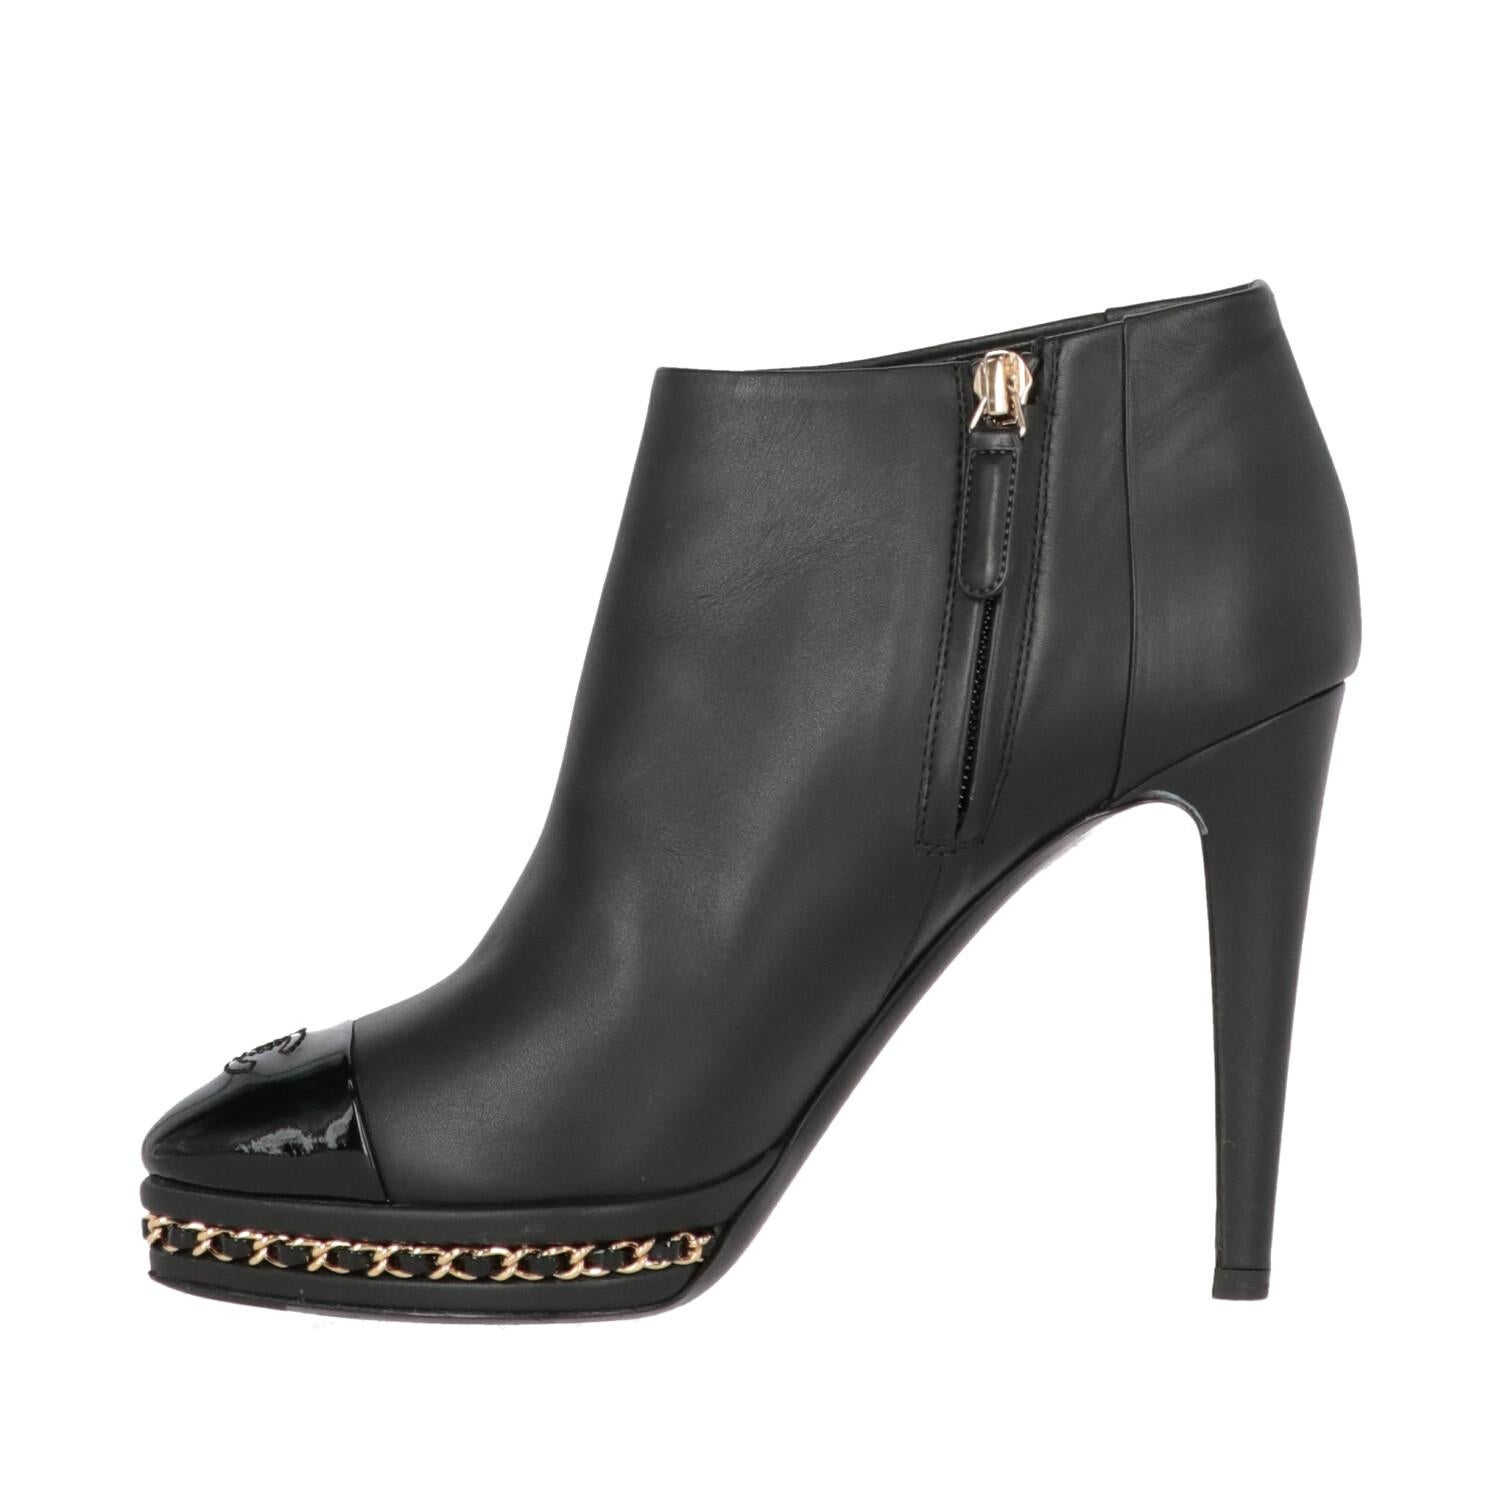 A.N.G.E.L.O. Vintage - Italy

Chanel black leather ankle boots. Patent leather almond toe with embroidered double C logo. Golden metal chain with woven leather plateau. High stiletto heel and side zip.

The product has some small marks on the